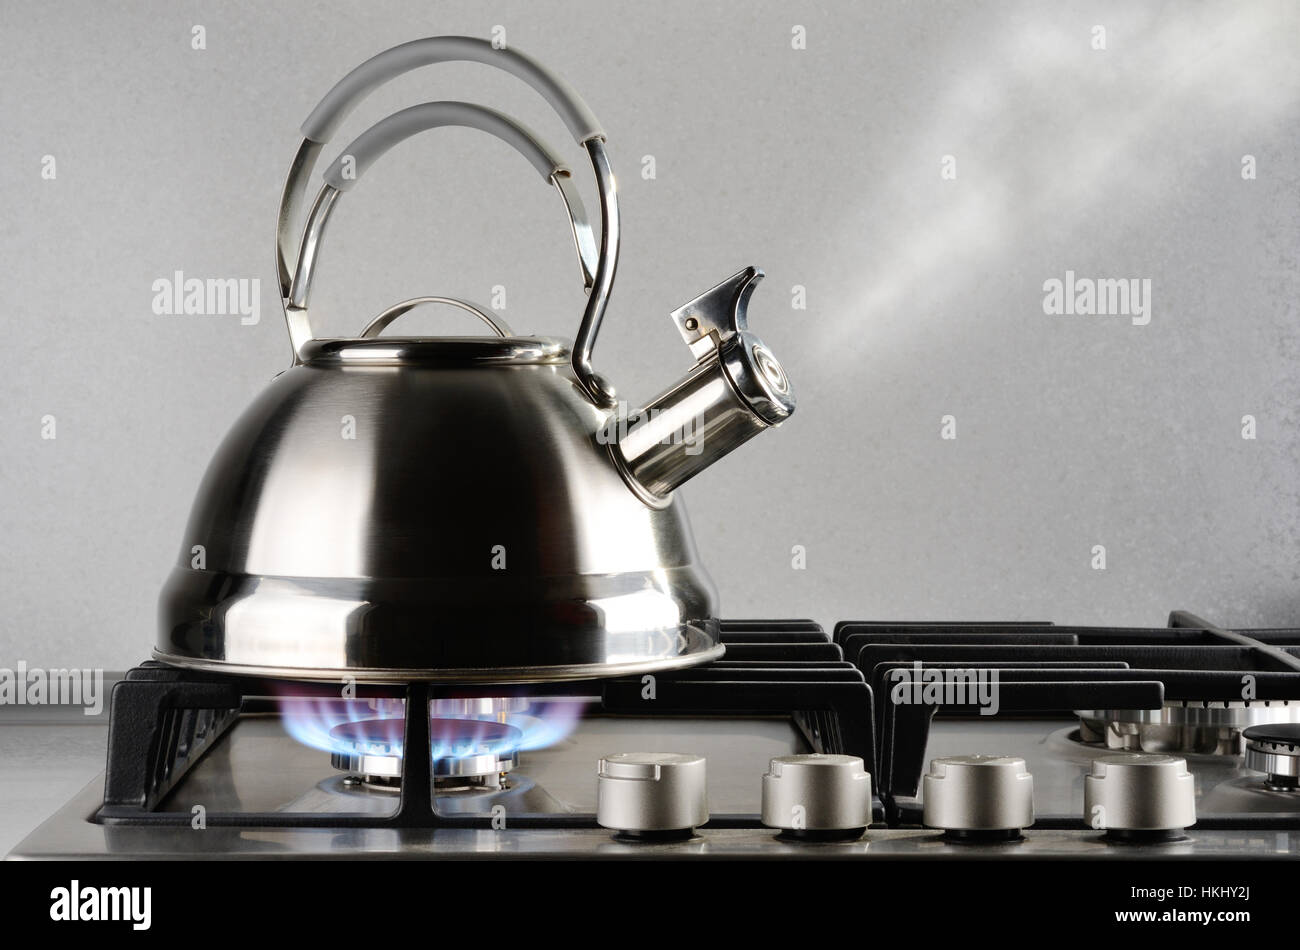 https://c8.alamy.com/comp/HKHY2J/tea-kettle-with-boiling-water-on-gas-stove-HKHY2J.jpg